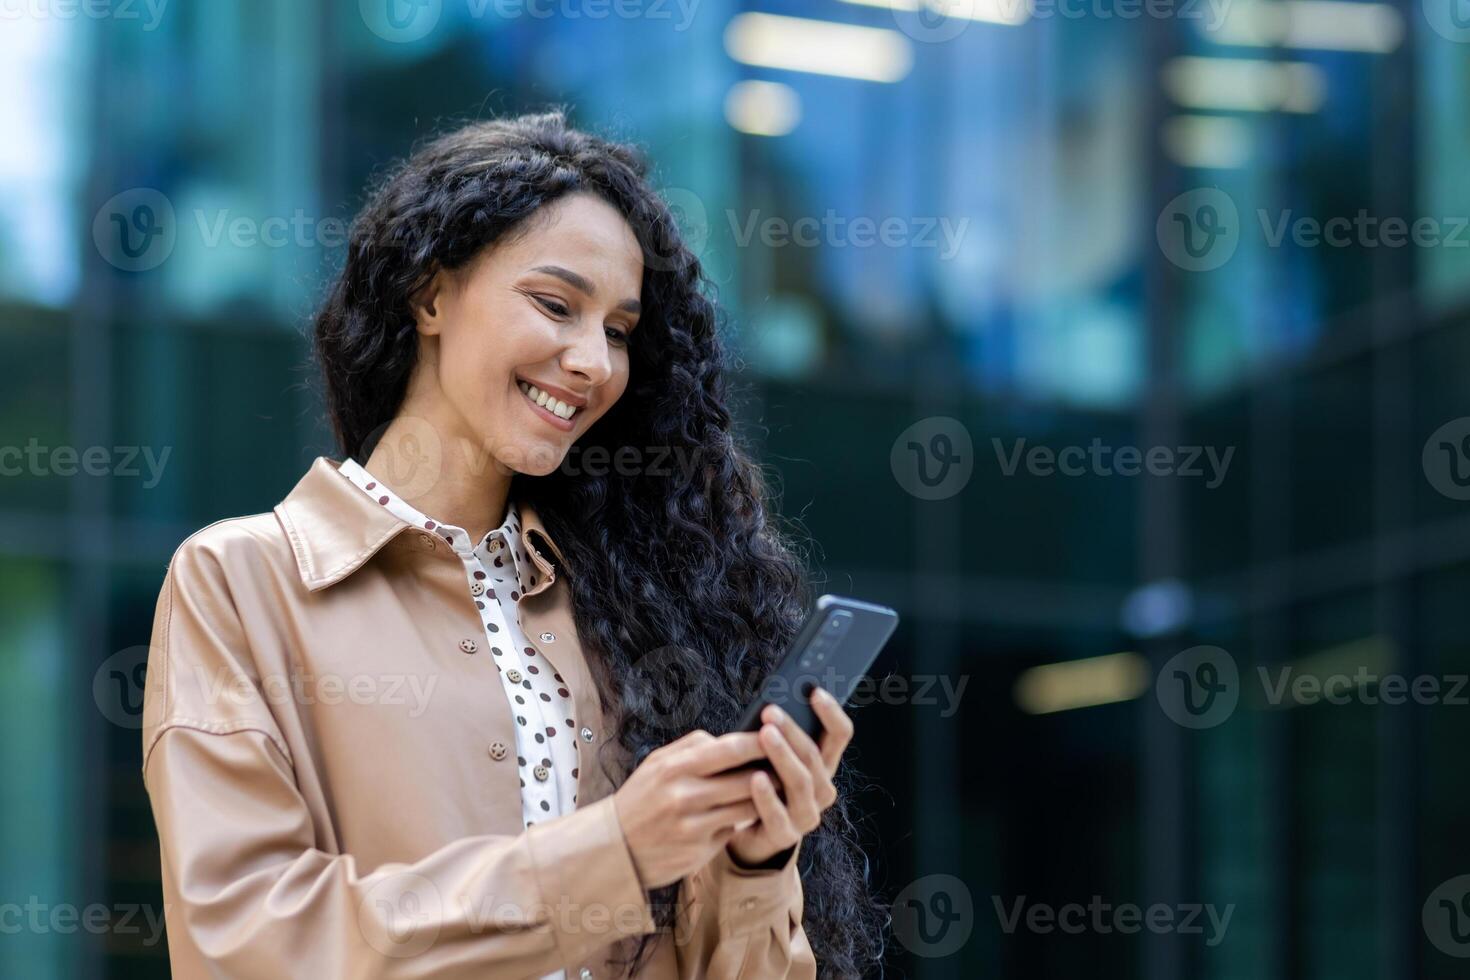 Young beautiful hispanic woman walking in the city, business woman holding phone in hands using smartphone app, woman smiling contentedly and happy outside office building with curly hair photo